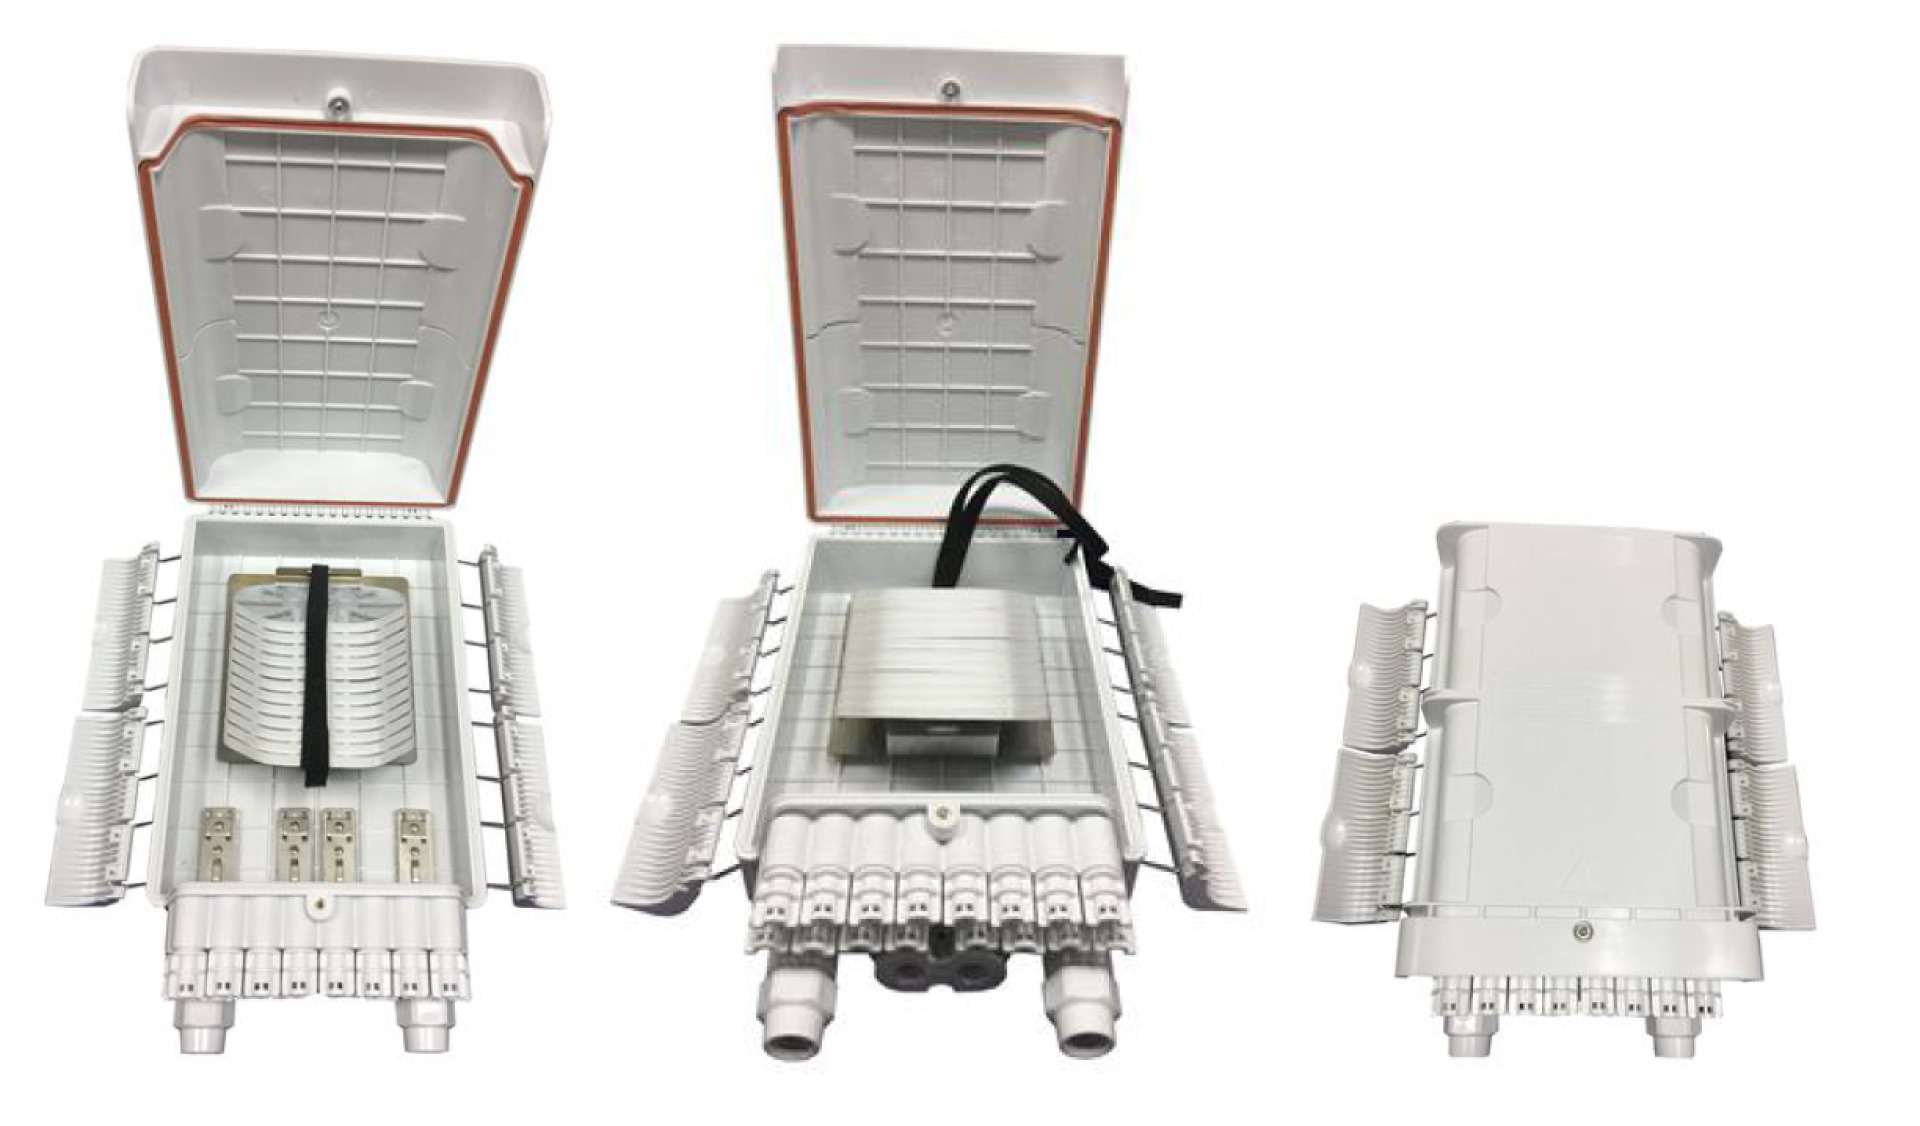 FTTH IP65 Connectionbox for 144 fiber and Fiber overlength box